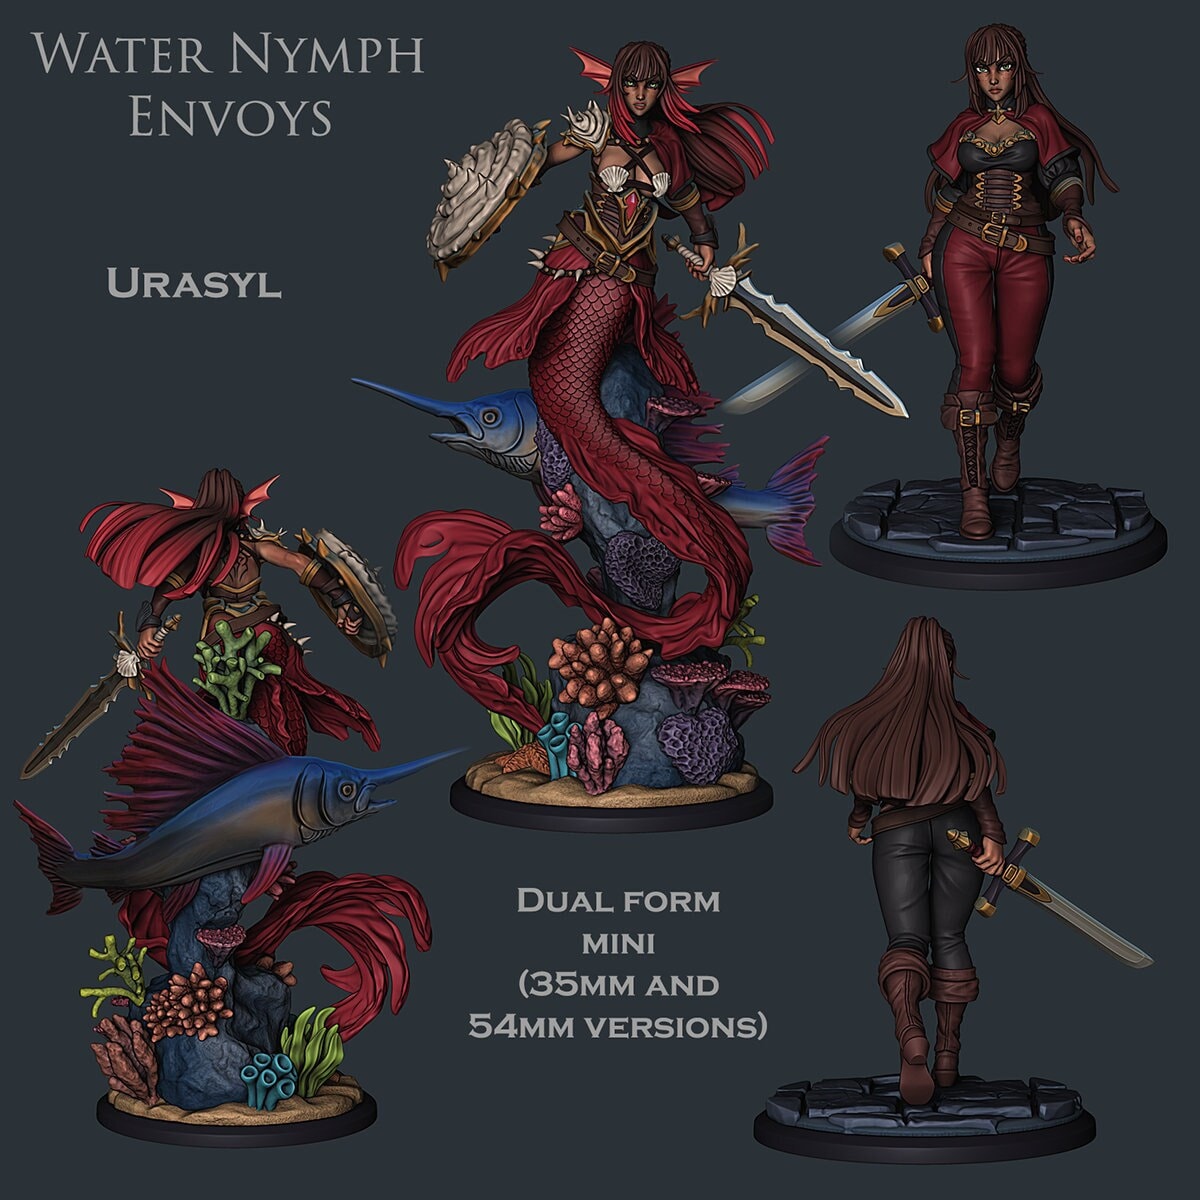 Urasyl the Warrior / Water Nymph | 35mm/54mm | NSFW Nymph Available | Resin 3D Printed Miniature | Ronin Arts Workshop